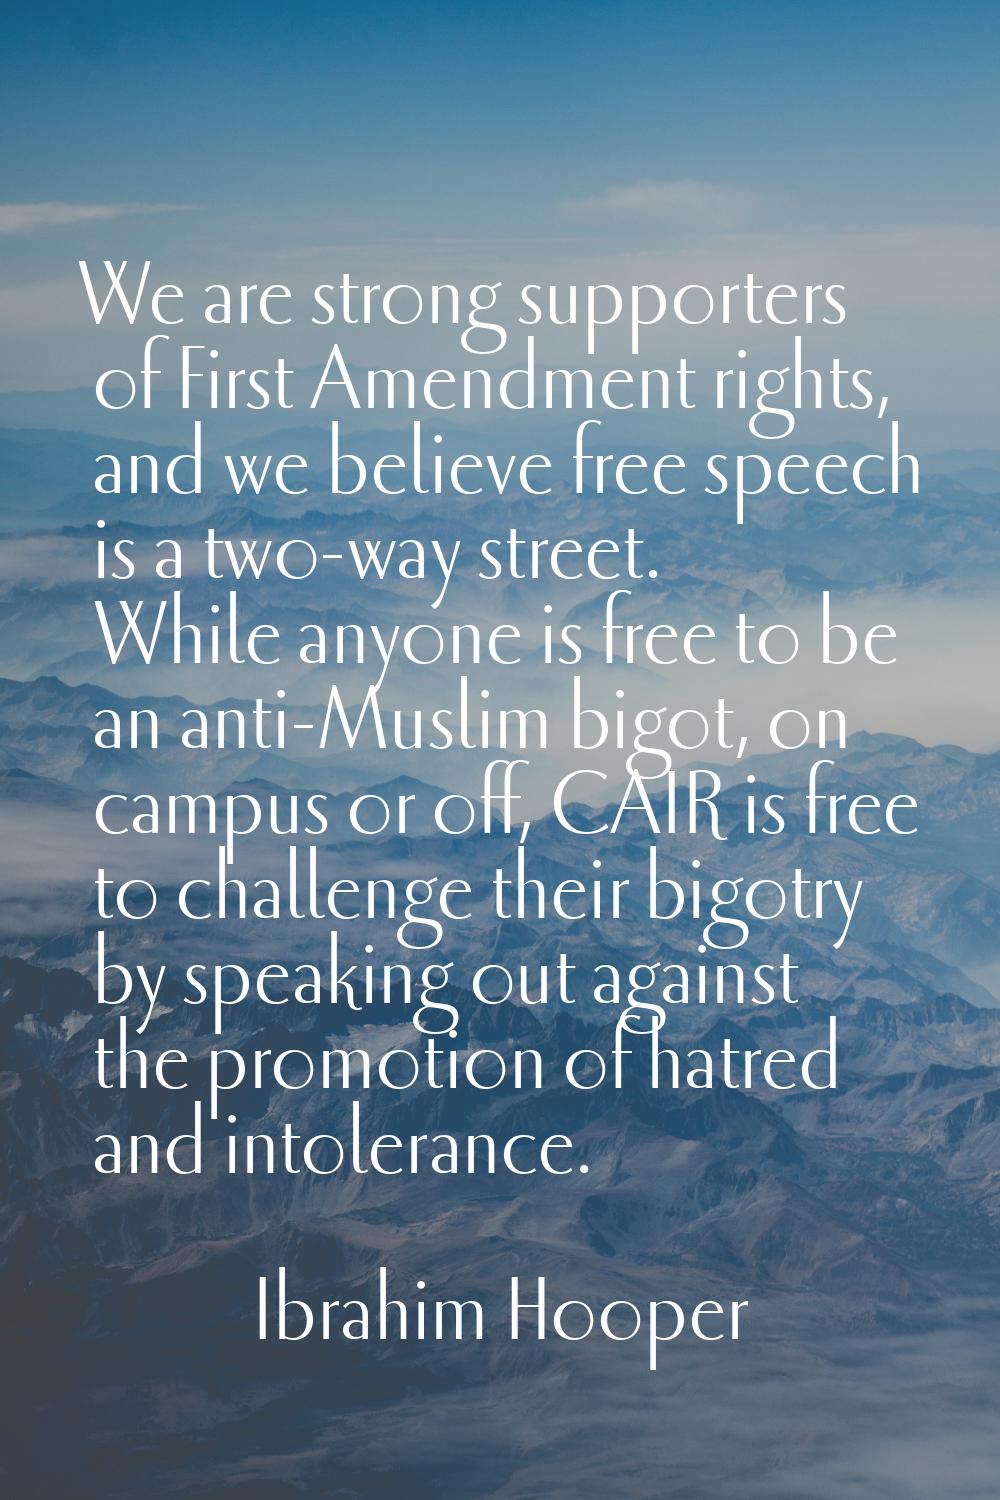 We are strong supporters of First Amendment rights, and we believe free speech is a two-way street.